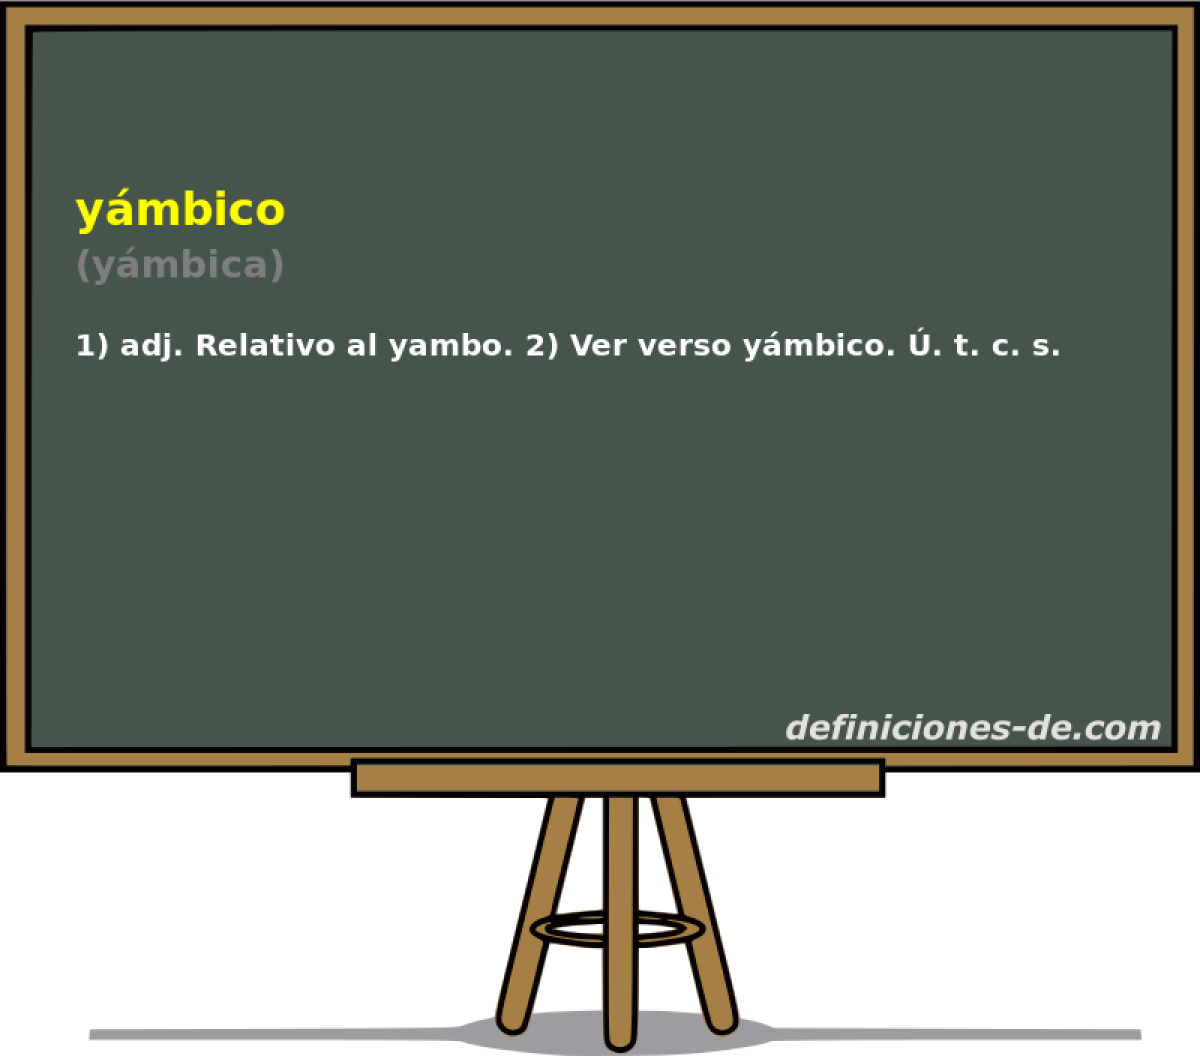 ymbico (ymbica)